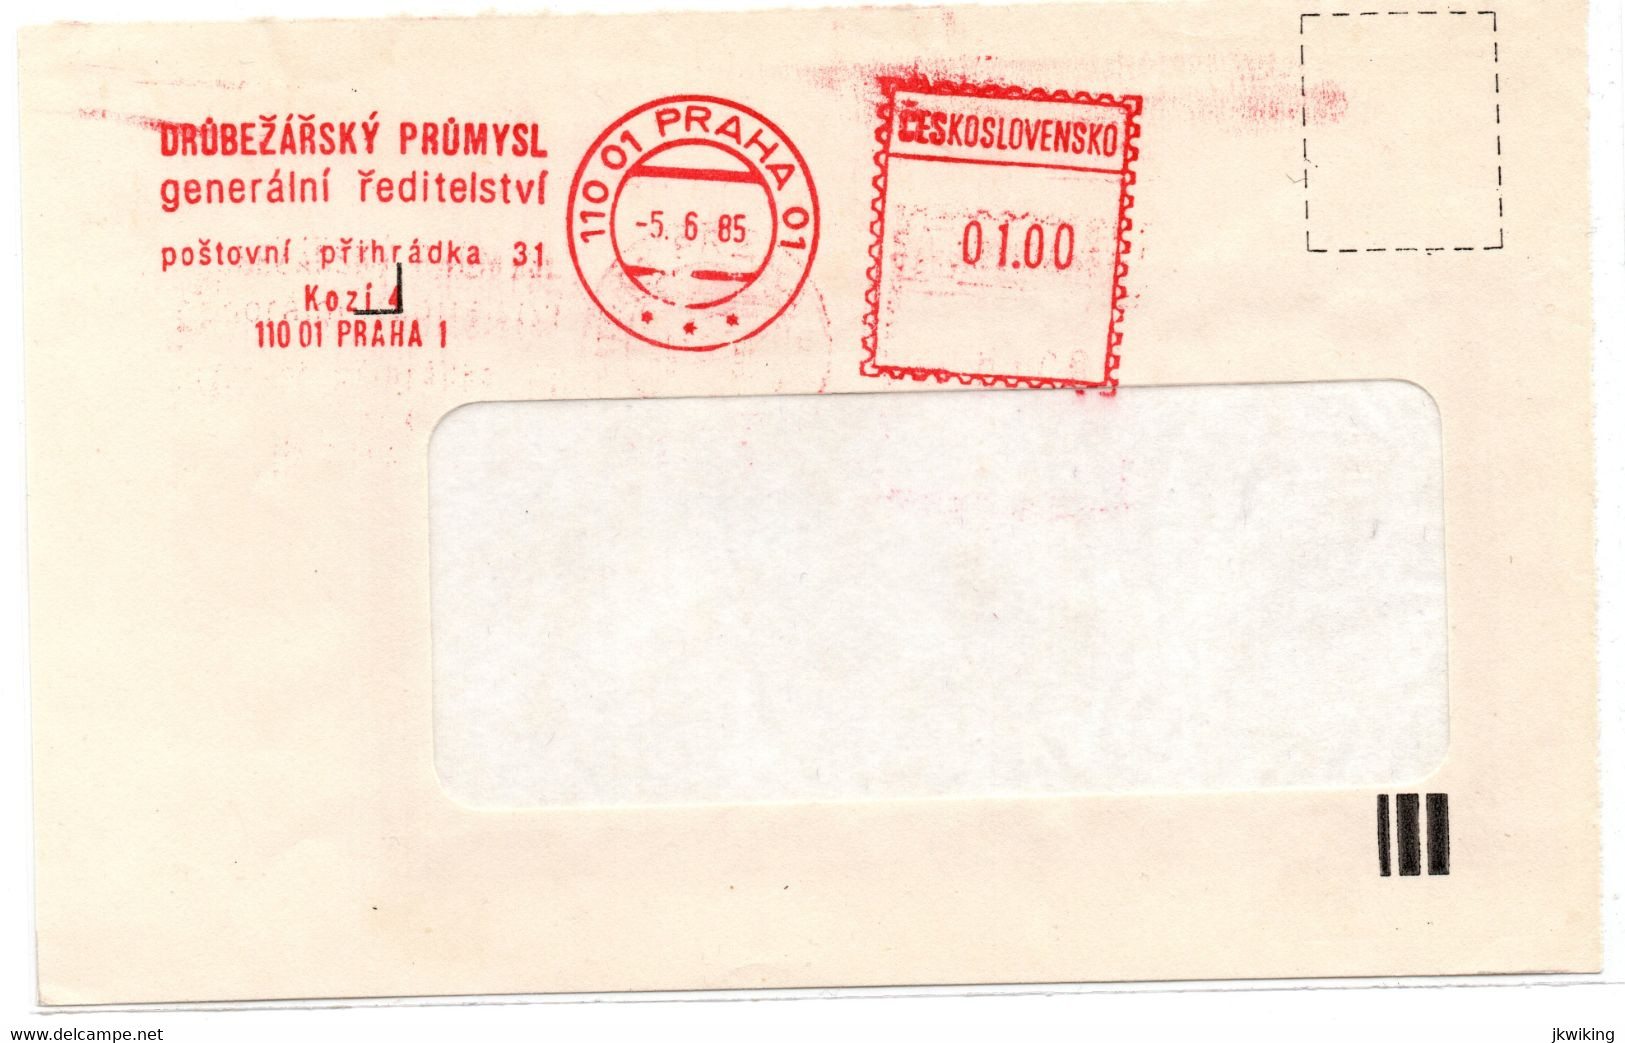 Machine Promotional Stamp Poultry Industry Prague 01 - 1985 - Czechoslovakia - Mechanical Postmarks (Advertisement)